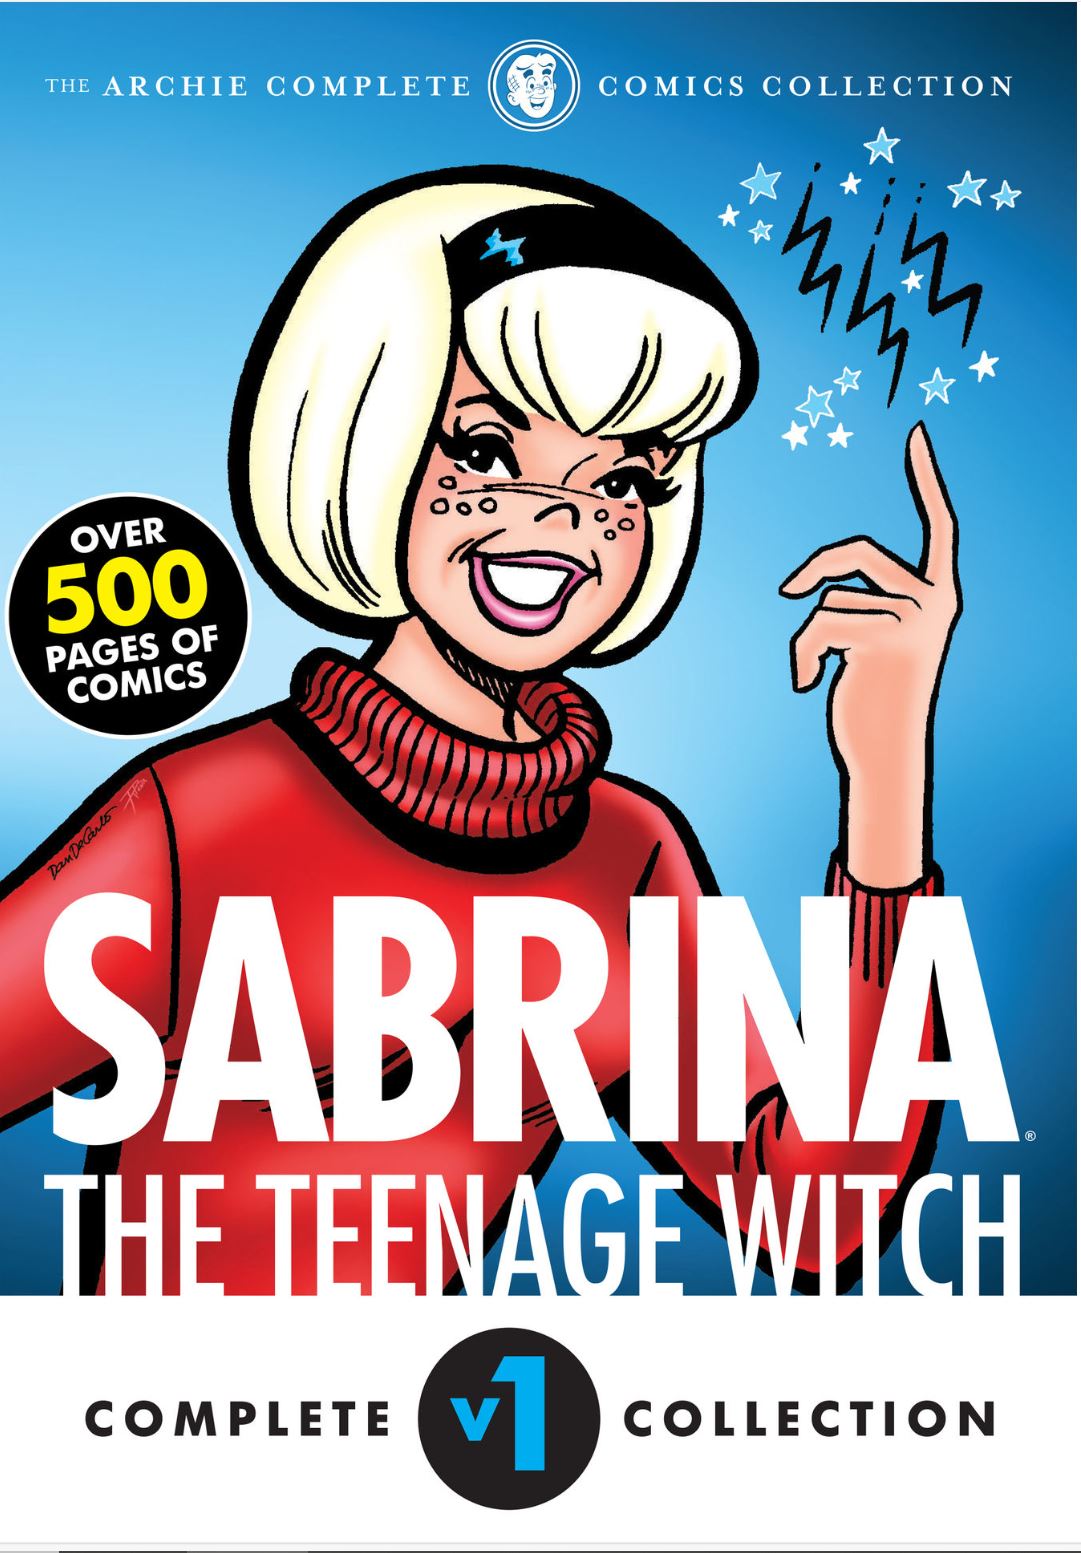 Sabrina the Teenage Witch The Complete Collection volume 1: 1962